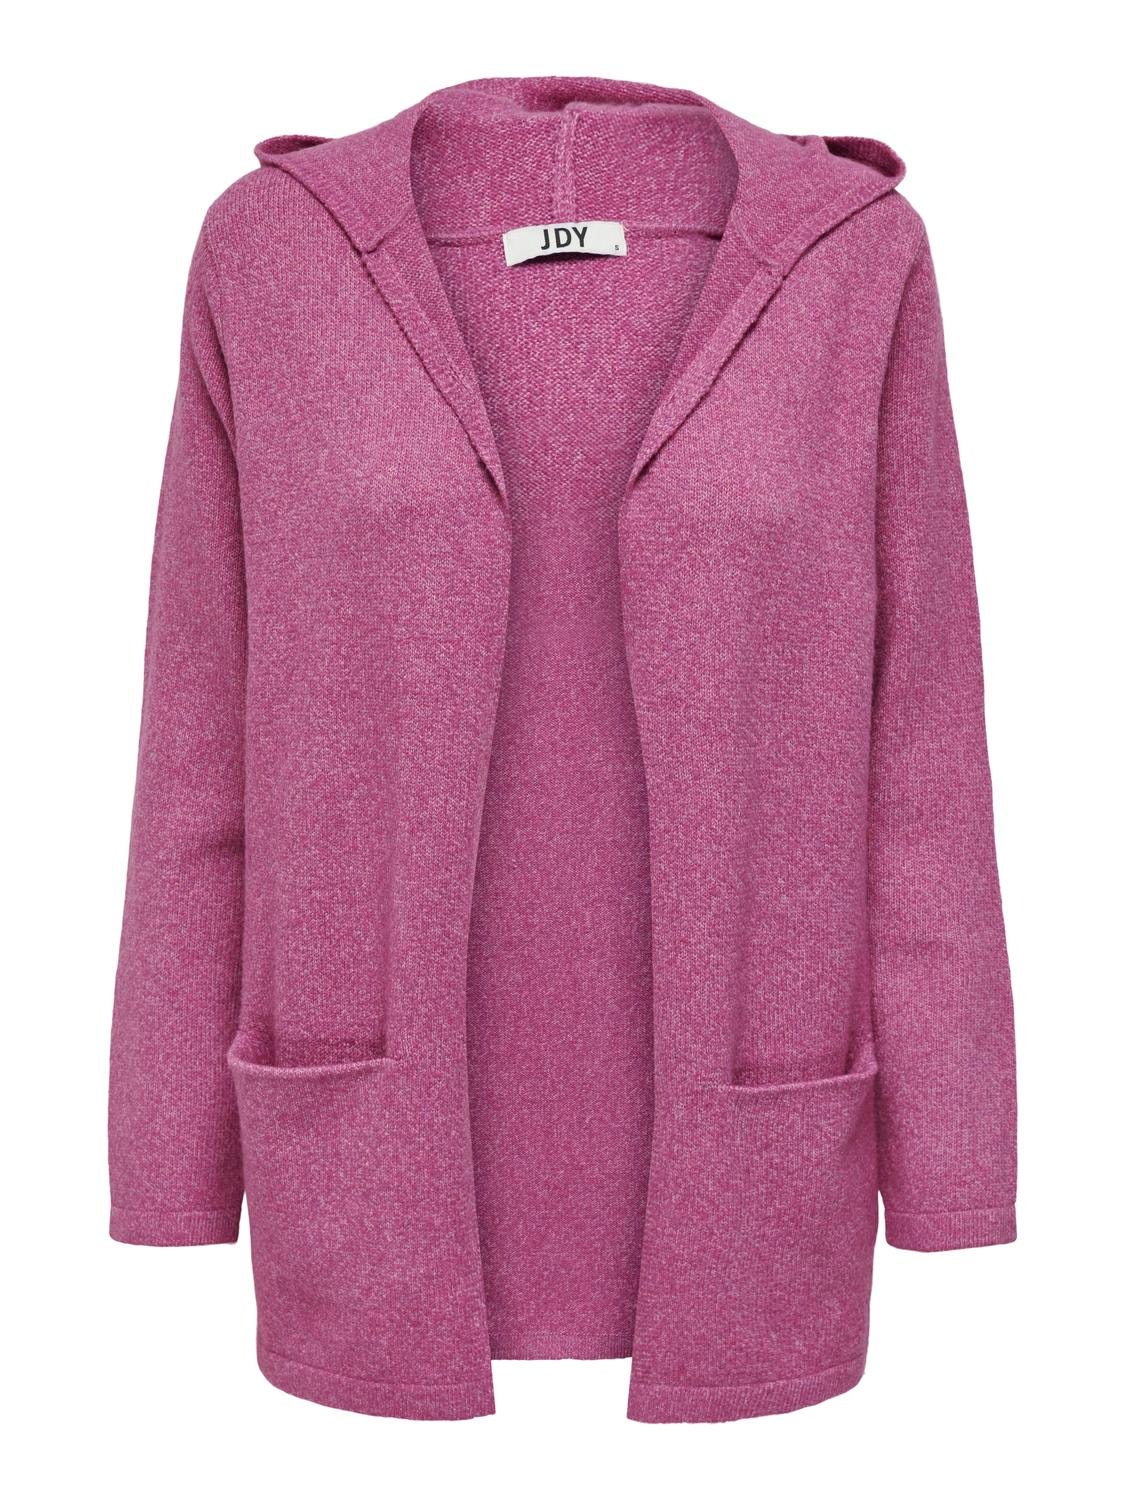 ONLY Hooded Knitted Cardigan -Meadow Mauve - 15211487